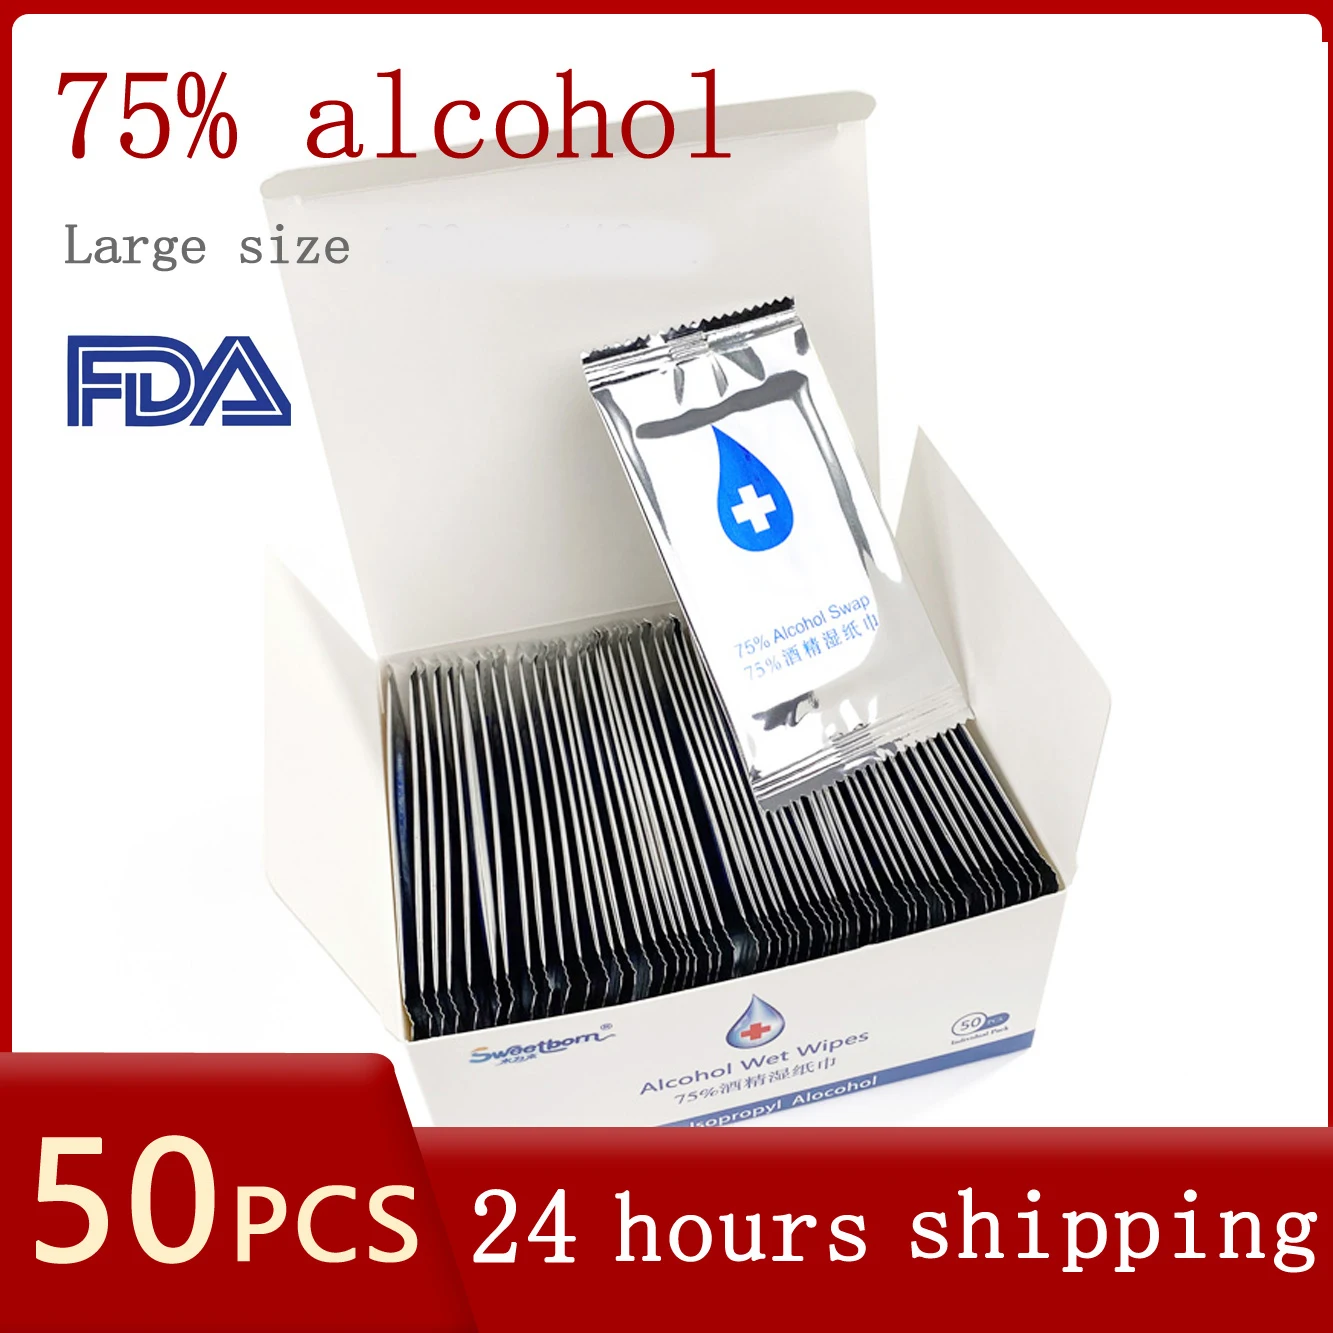 50 Pieces / Pack 75% Alcohol Disinfectant Wipes Paper Portable Independent Package Disinfection No Hand Washing Tissue Box